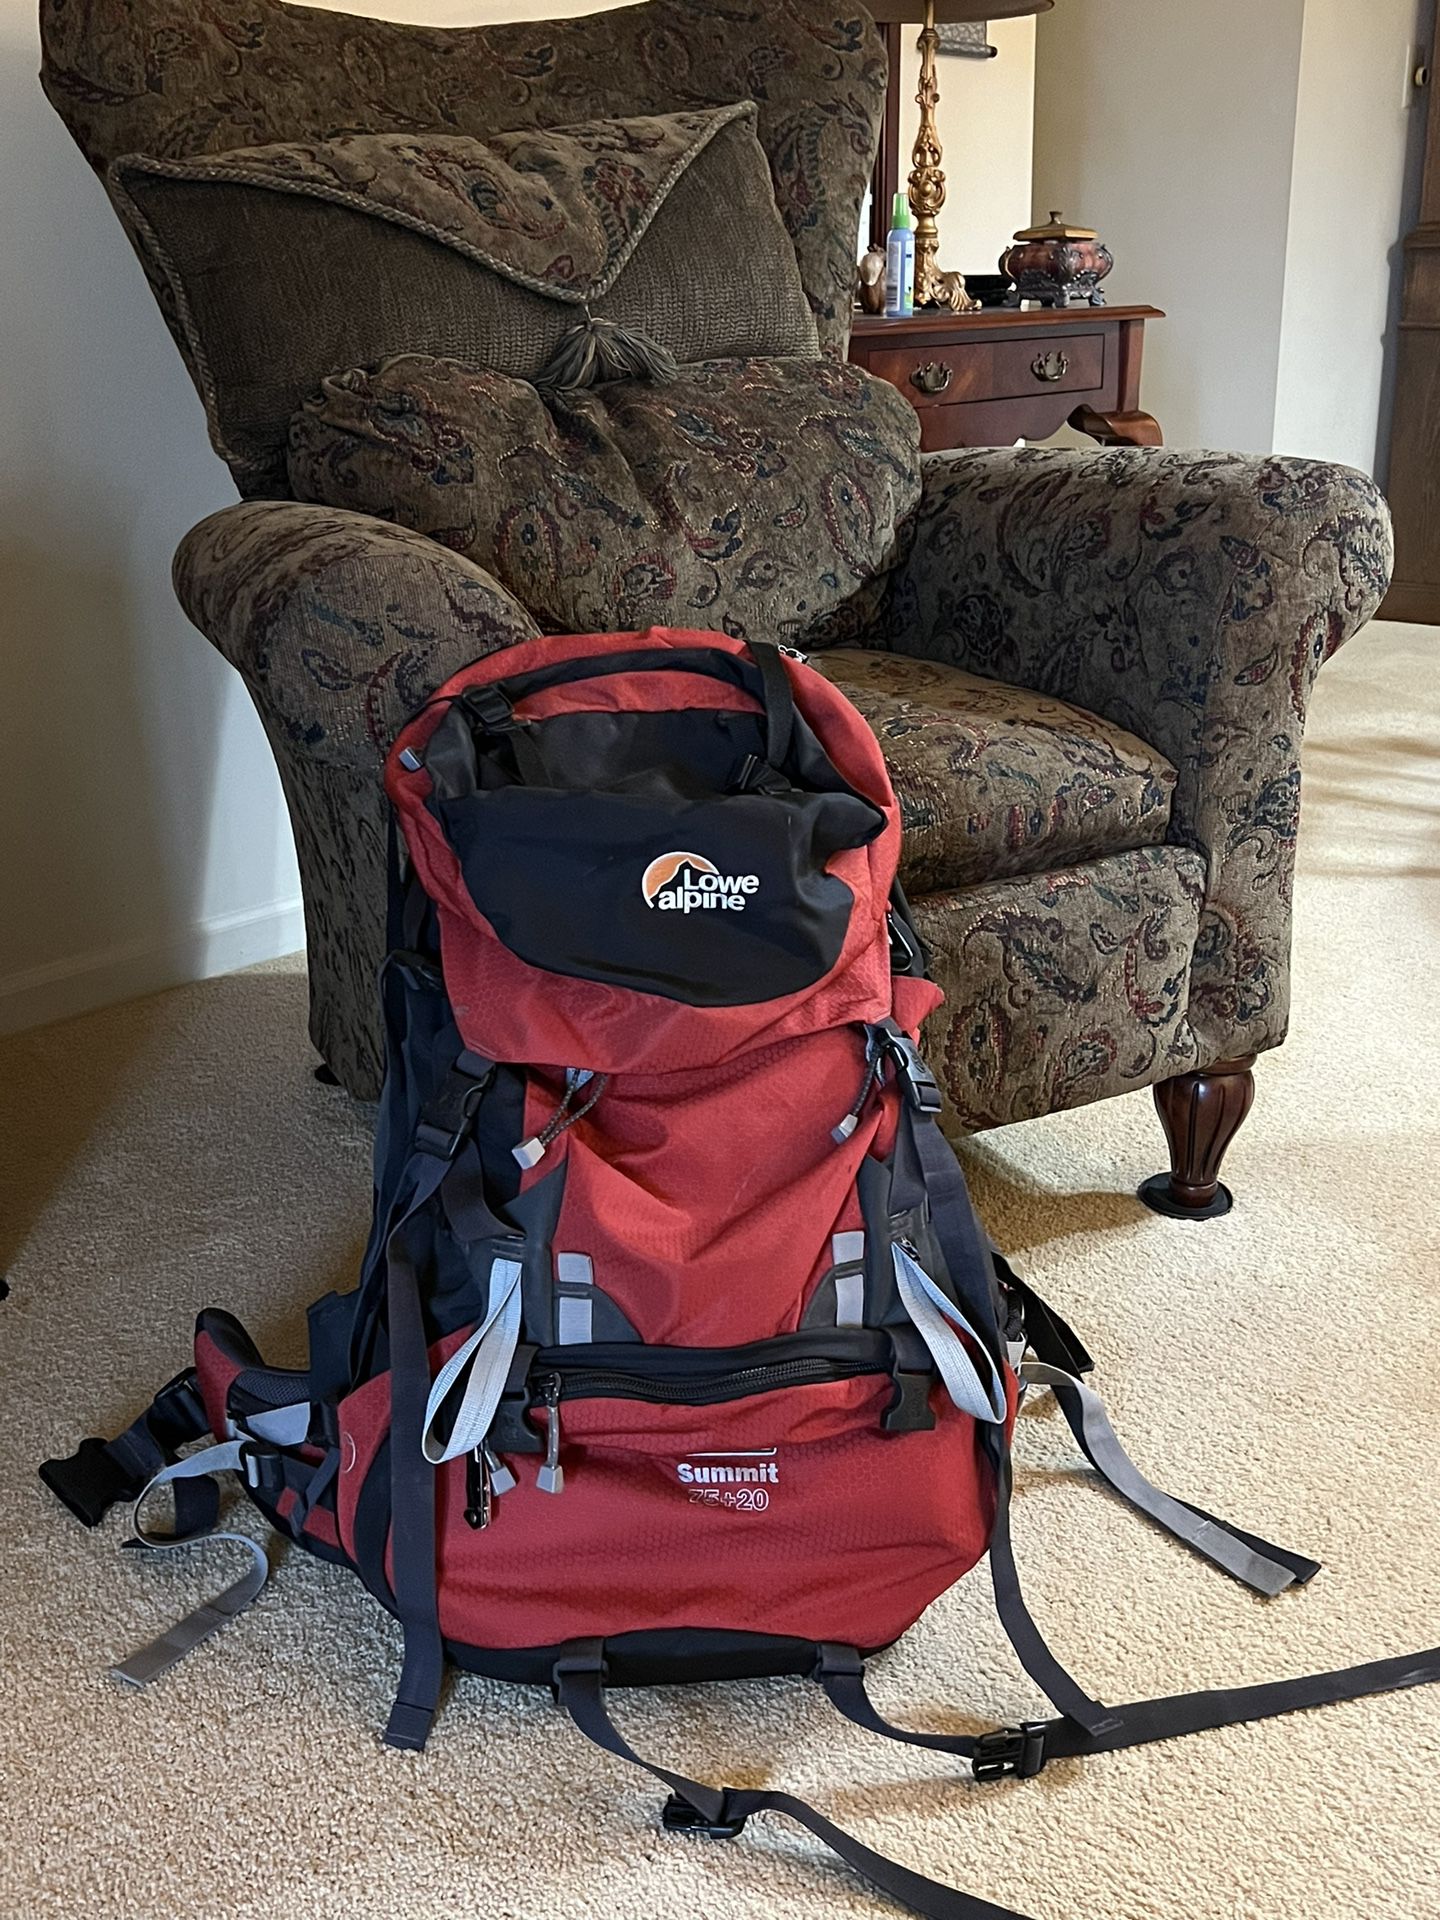 Lowe Alpine Backcountry Pack - TFX Expedition 75+20